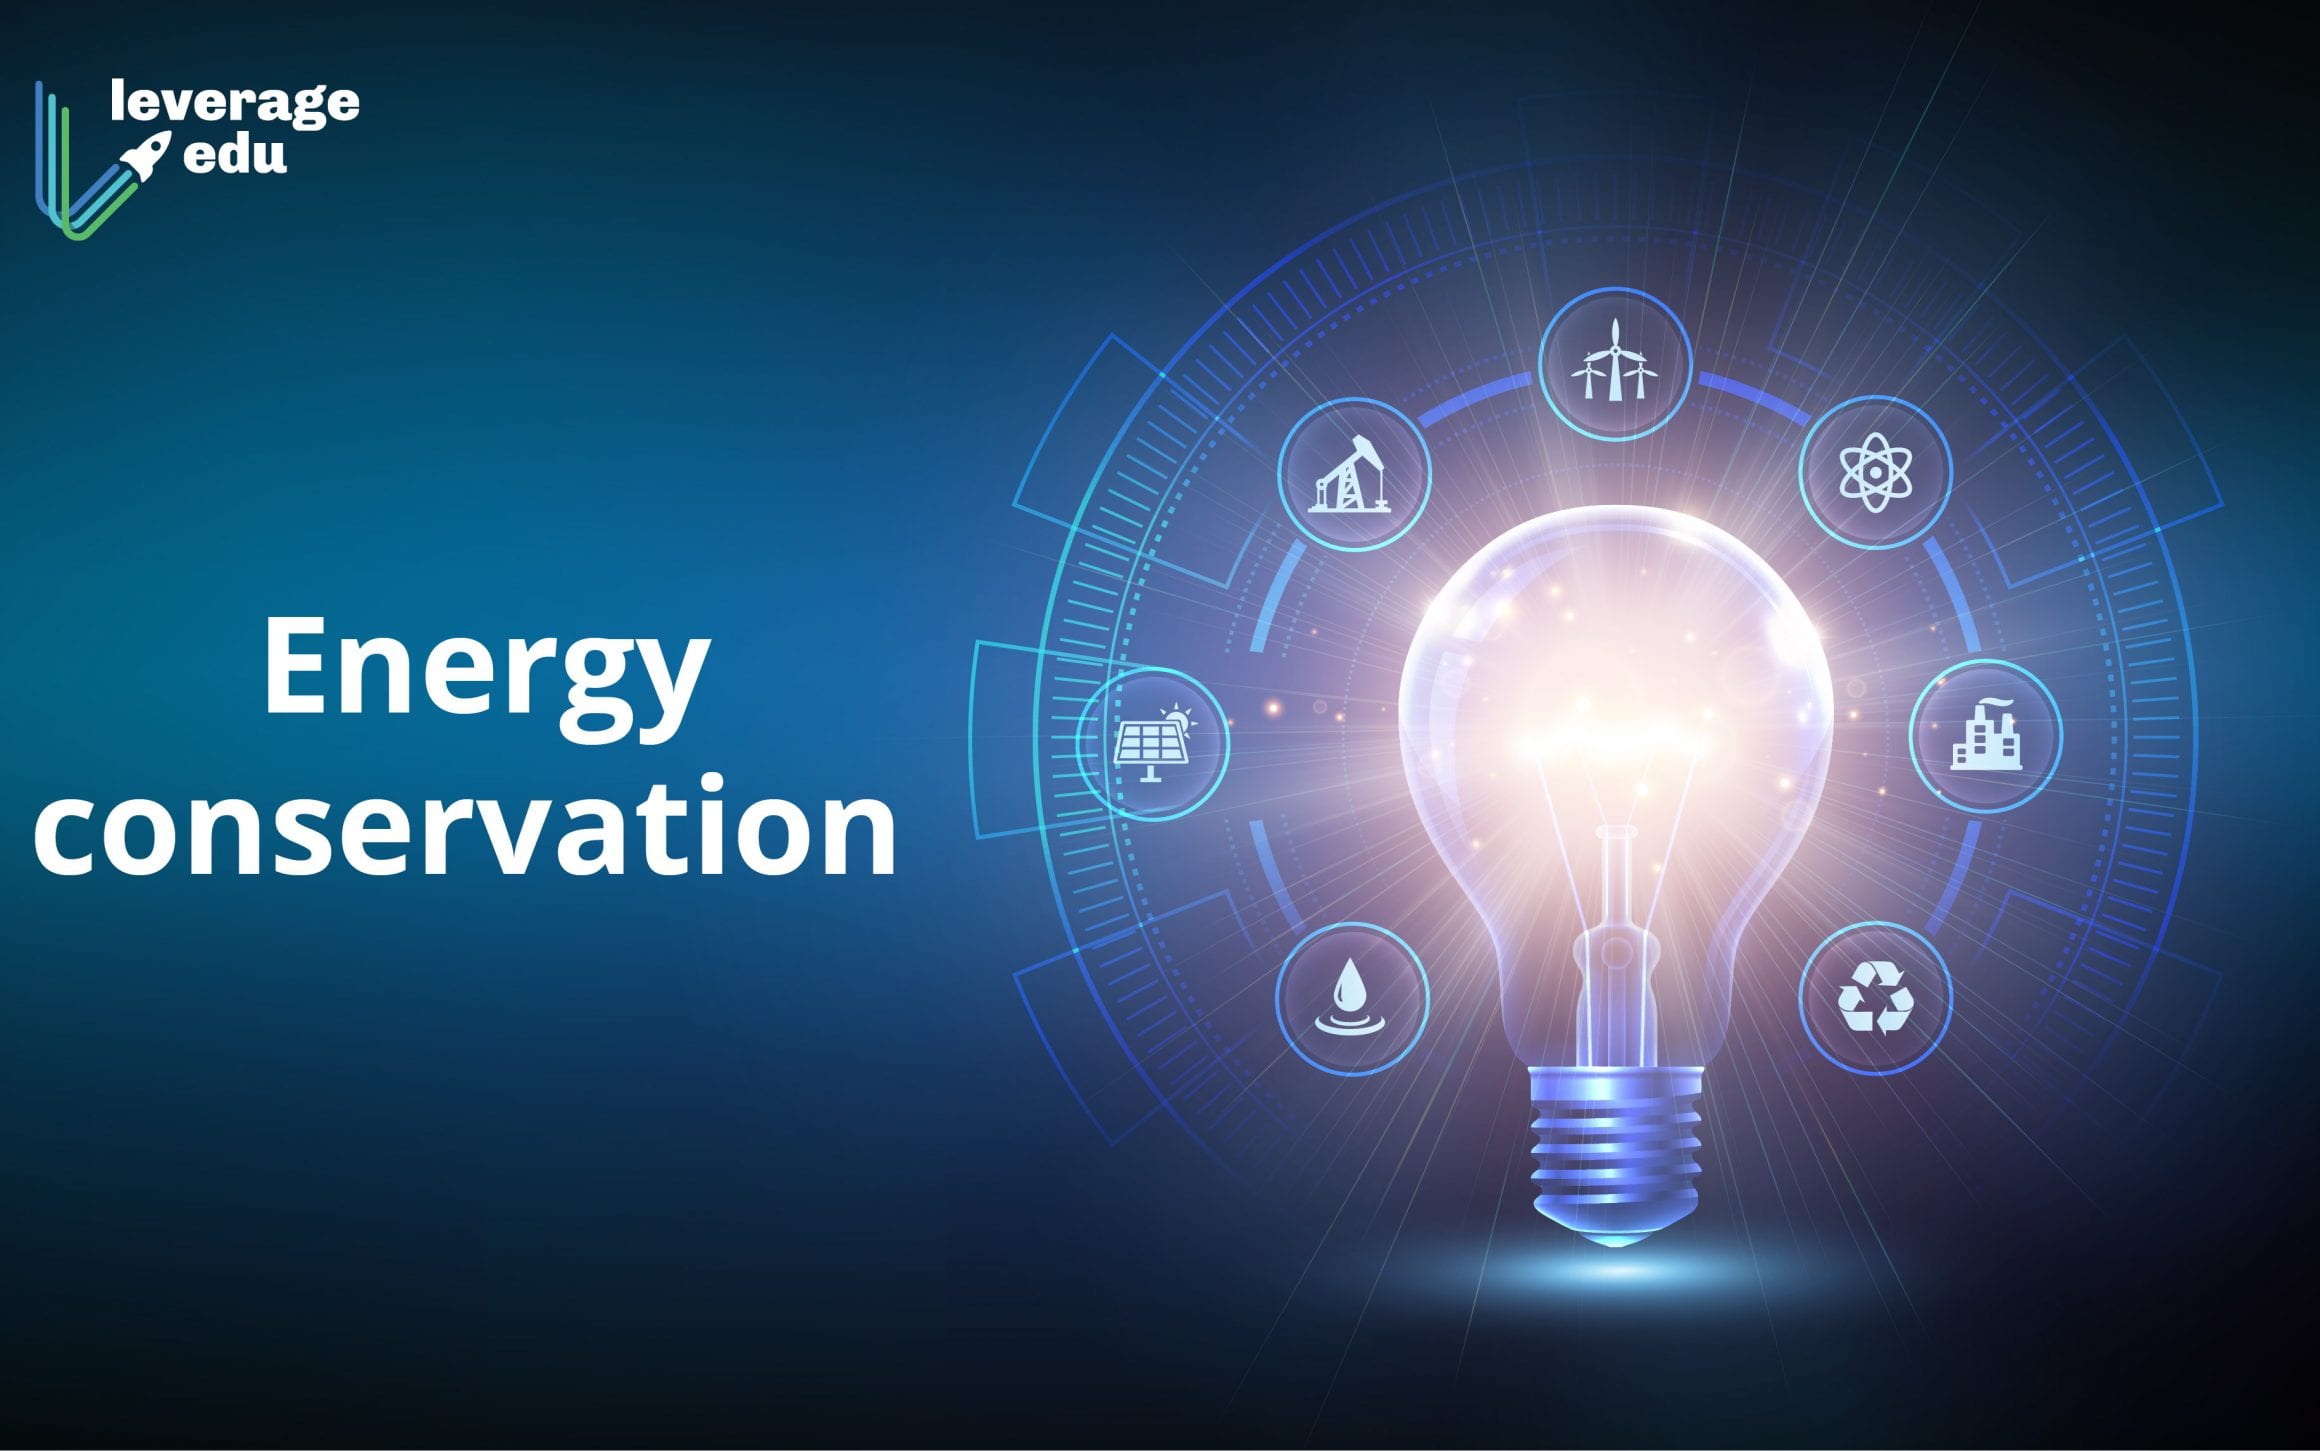 let-s-understand-the-importance-of-energy-conservation-leverage-edu